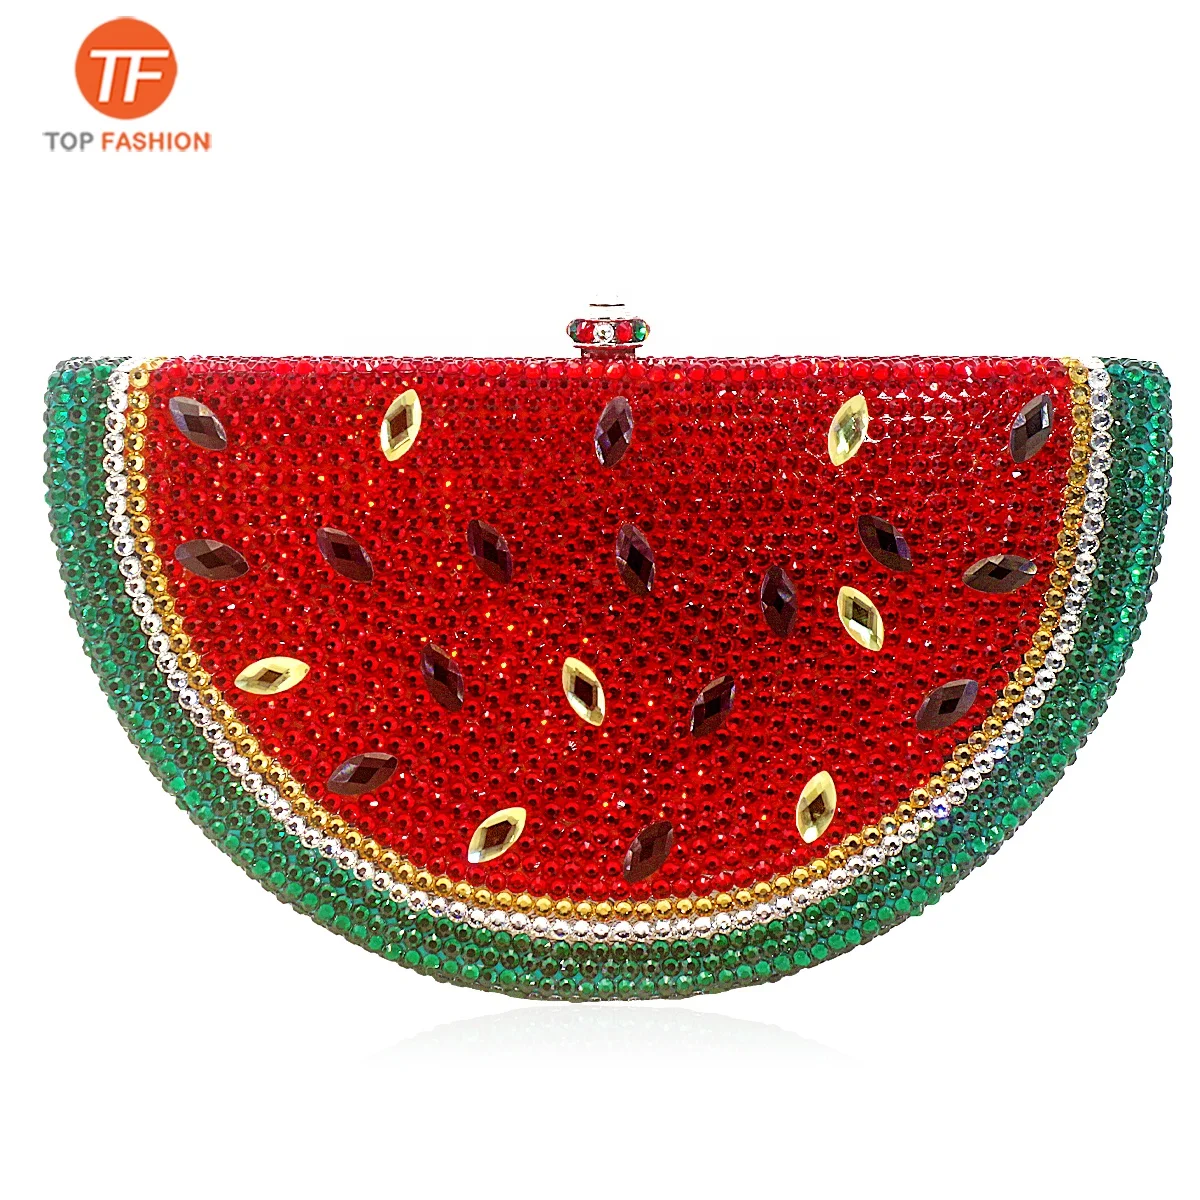 

Factory Wholesales Elegant Crystal Rhinestone Clutch Evening Bag for Formal Party Handmade Watermelon Minaudiere Purse, ( accept customized )